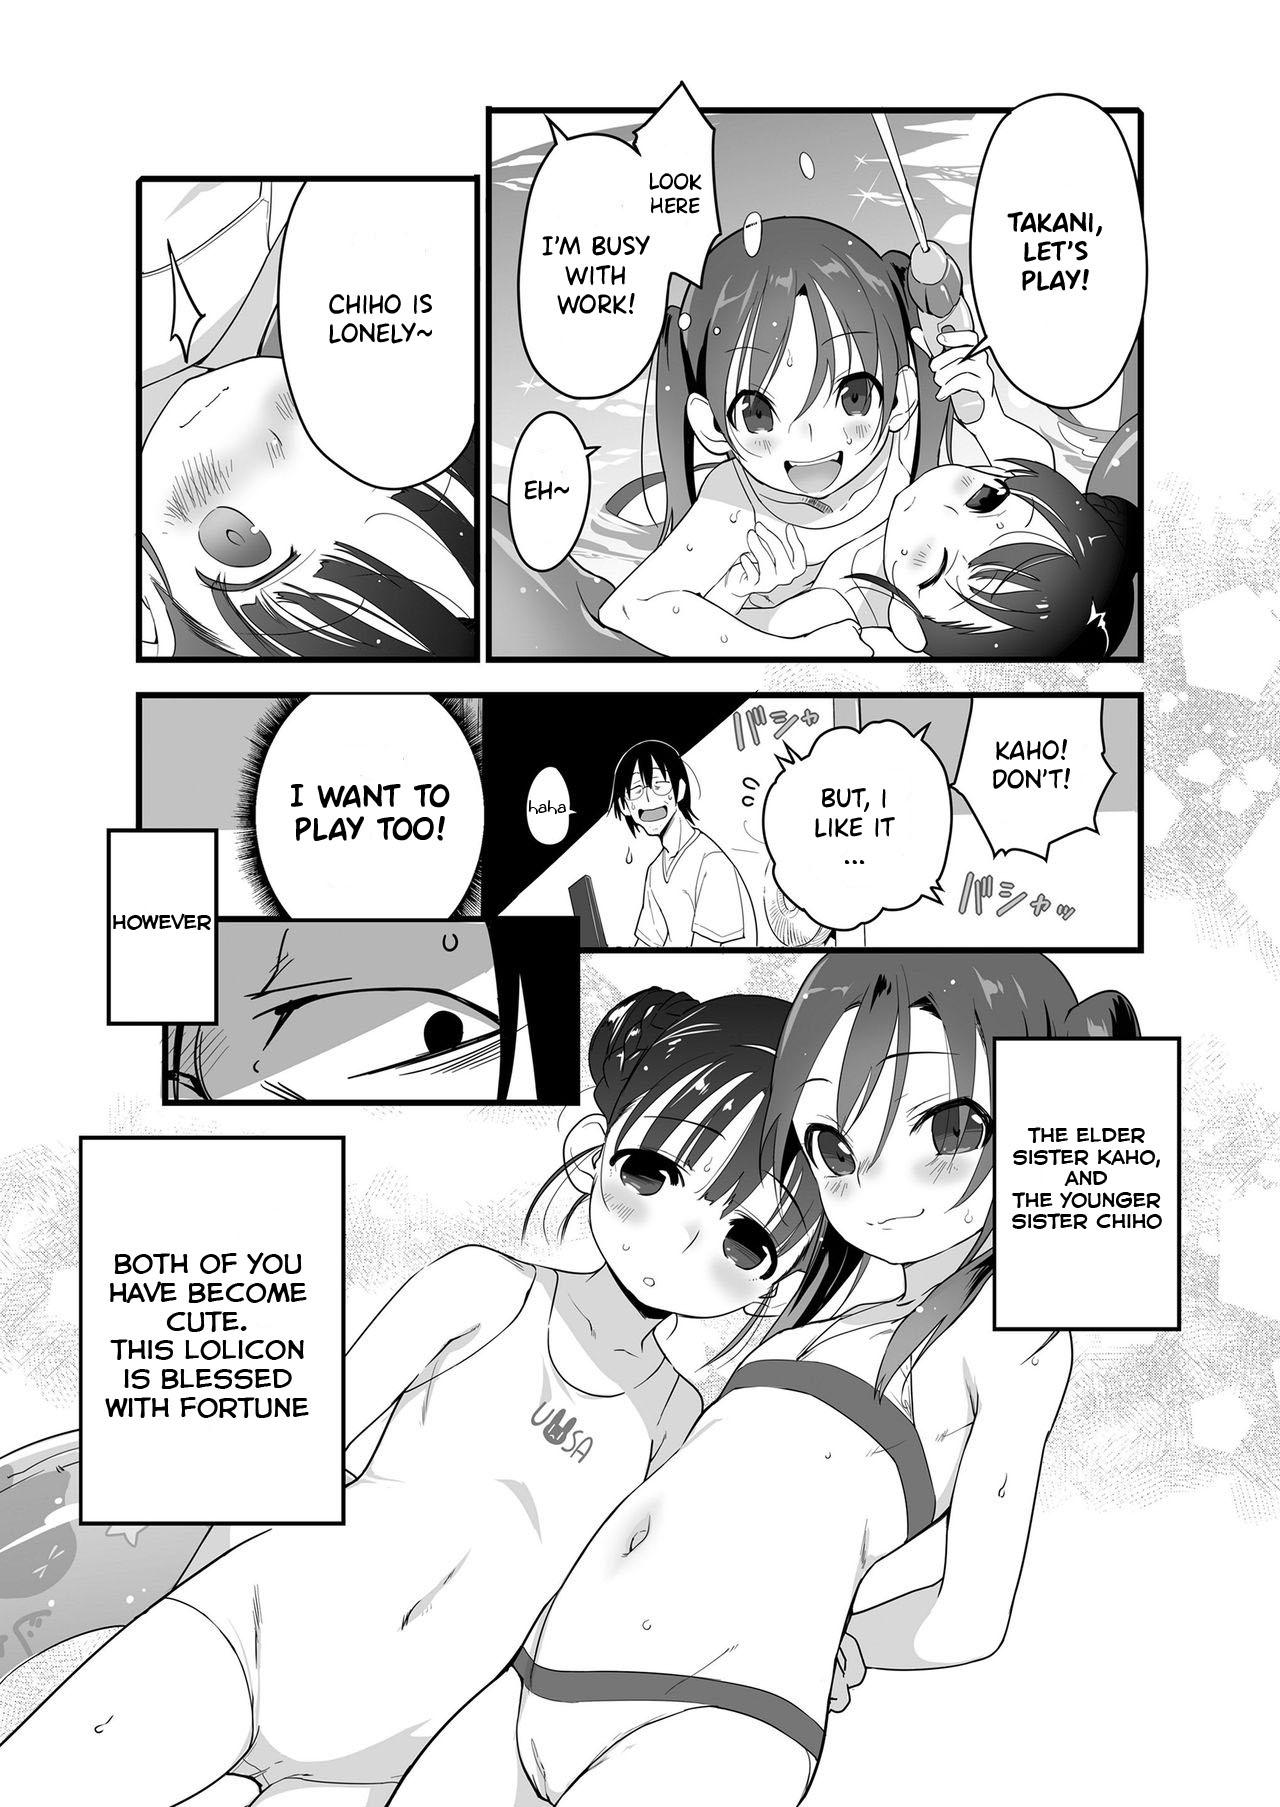 Foot Worship Uchiage Hanabi, Ane to Miruka? Imouto to Miruka? | Fireworks, Should we see it with the elder sister or the younger sister? Amateur Sex - Page 3